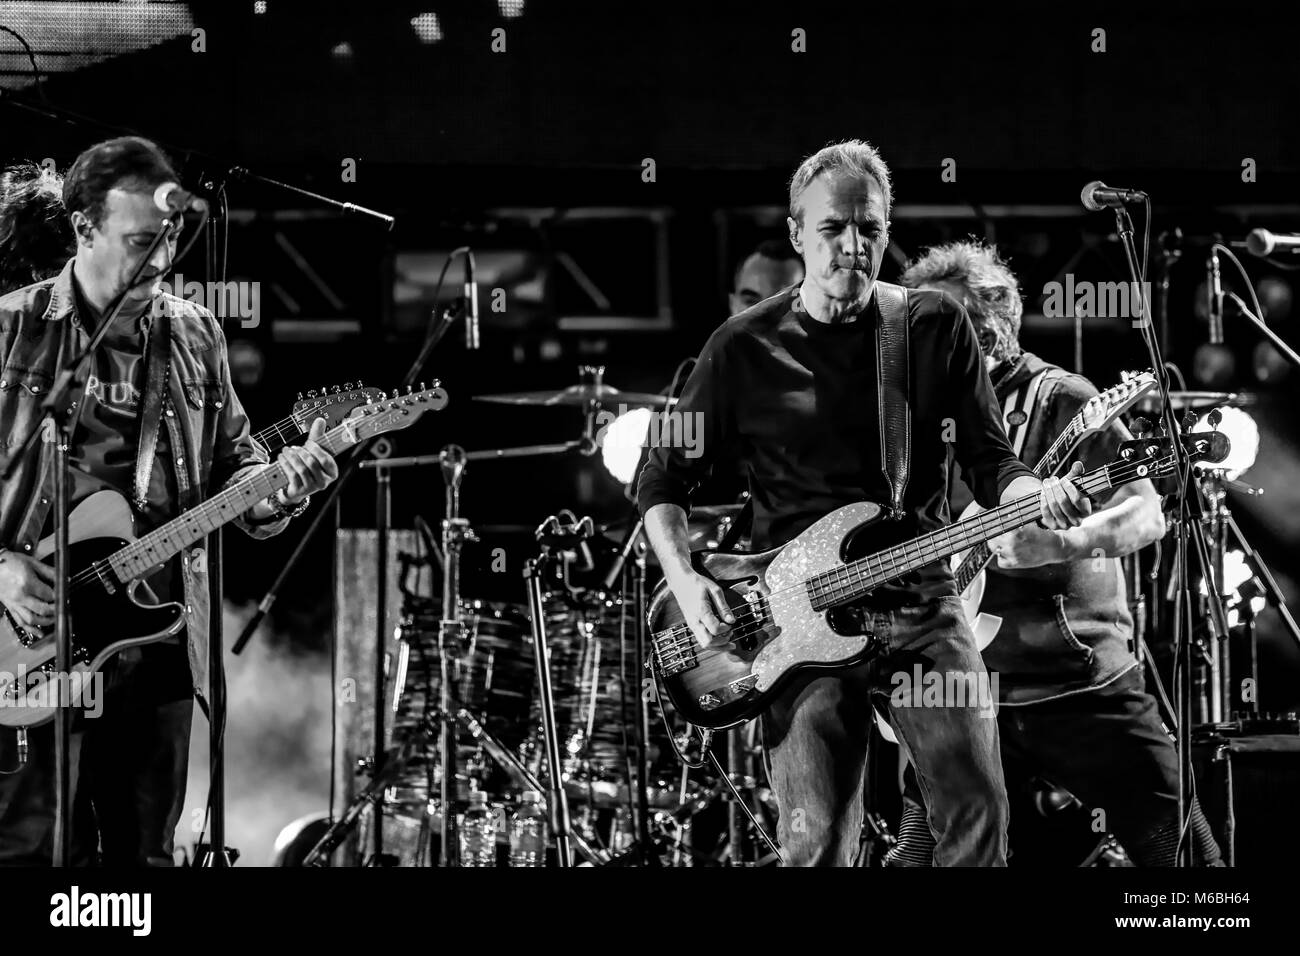 The rock bands in Spanish of the 80s and 90s, Men G from Spain and the Enanitos Verdes from Argentina, offered a concert of the Huevos Revueltos tour performed at Hipodromo in the city of Hermosillo Sonora. (Photo: Luis Gutierre / NortePhoto.com) Stock Photo